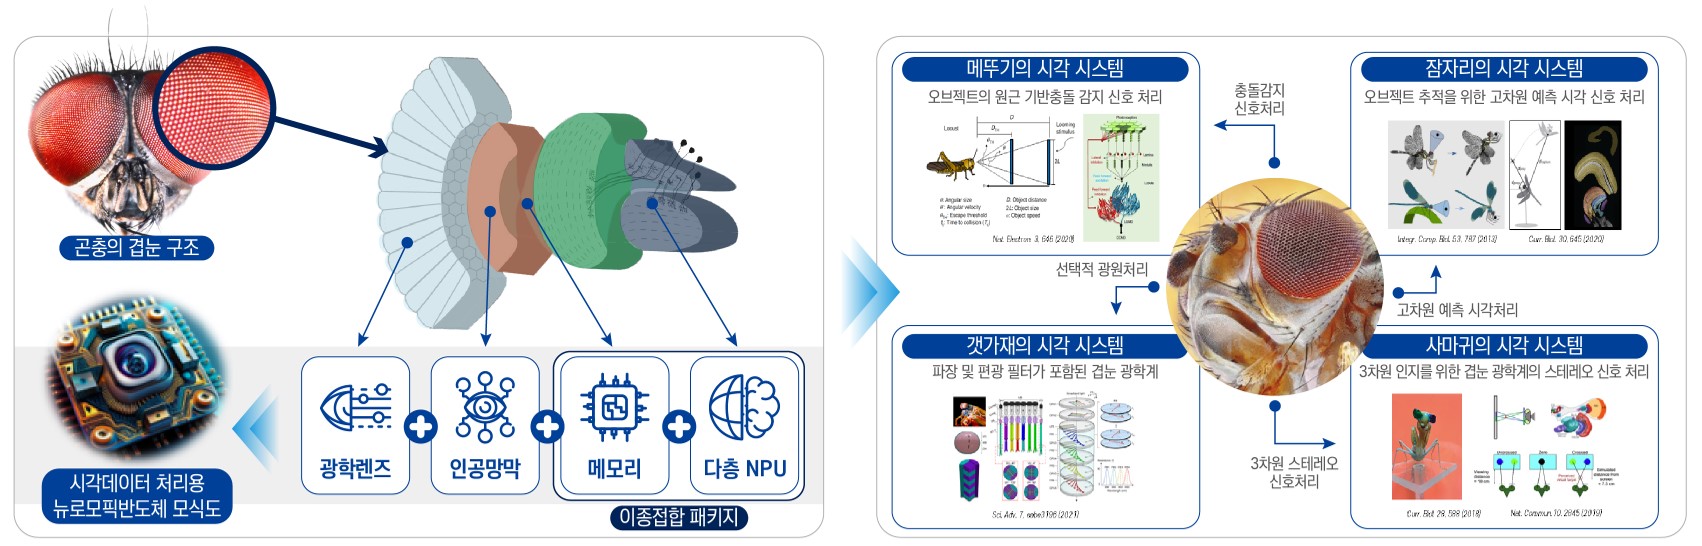 “Developing a compound eye imitation semiconductor for Supervision AI” GIST, selected as a regional innovation mega project host 이미지